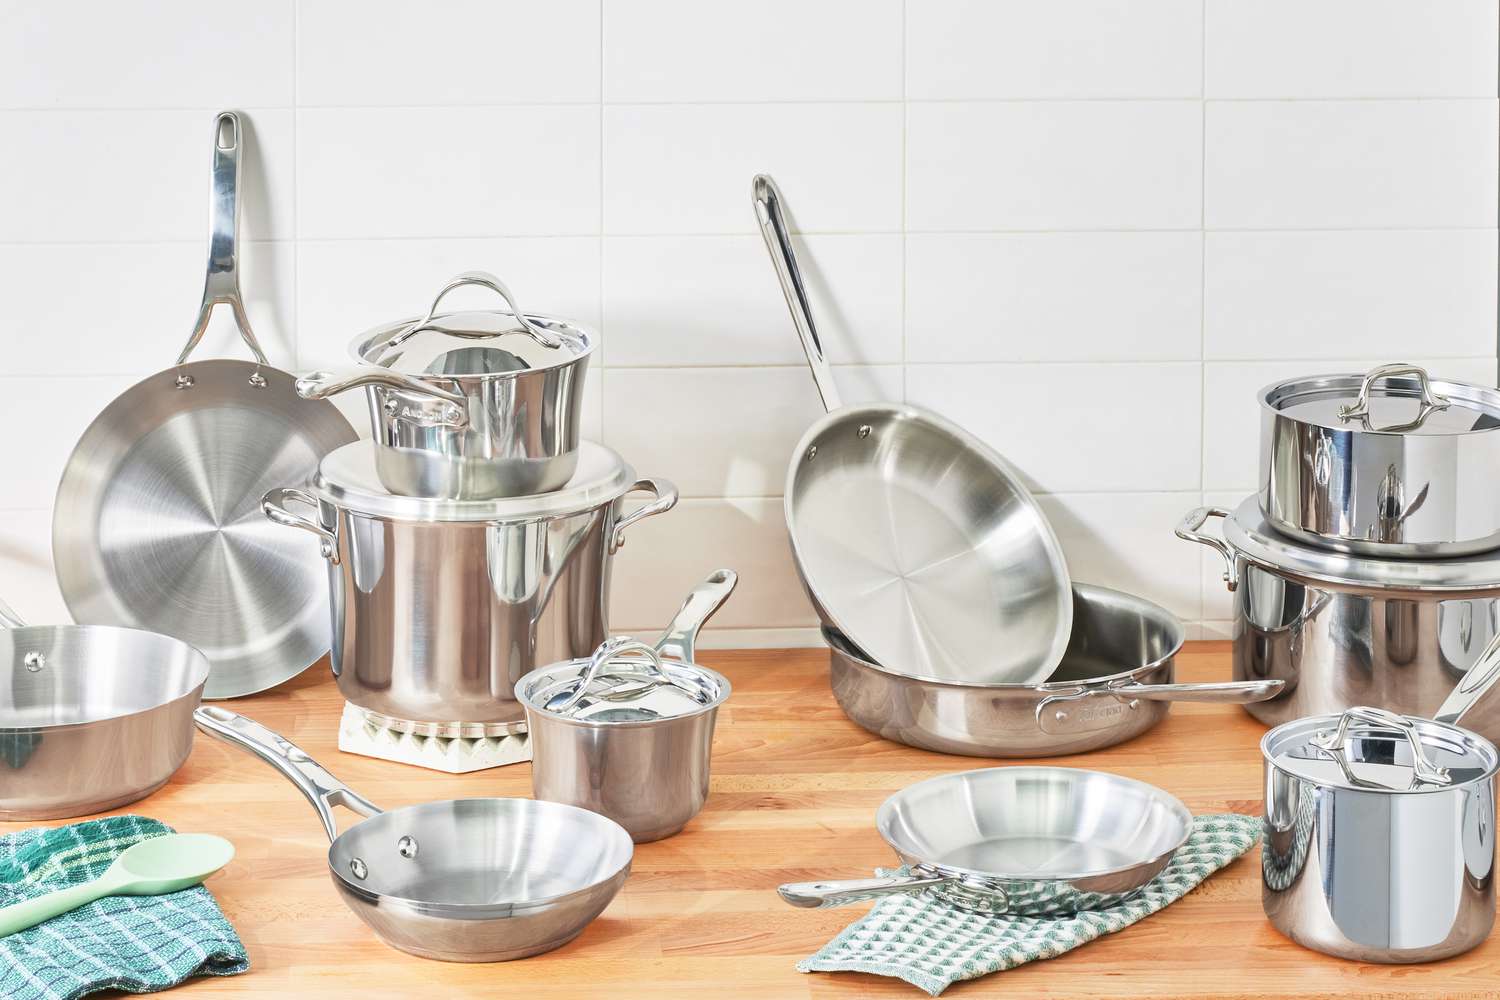 What utensils to use with stainless steel cookware